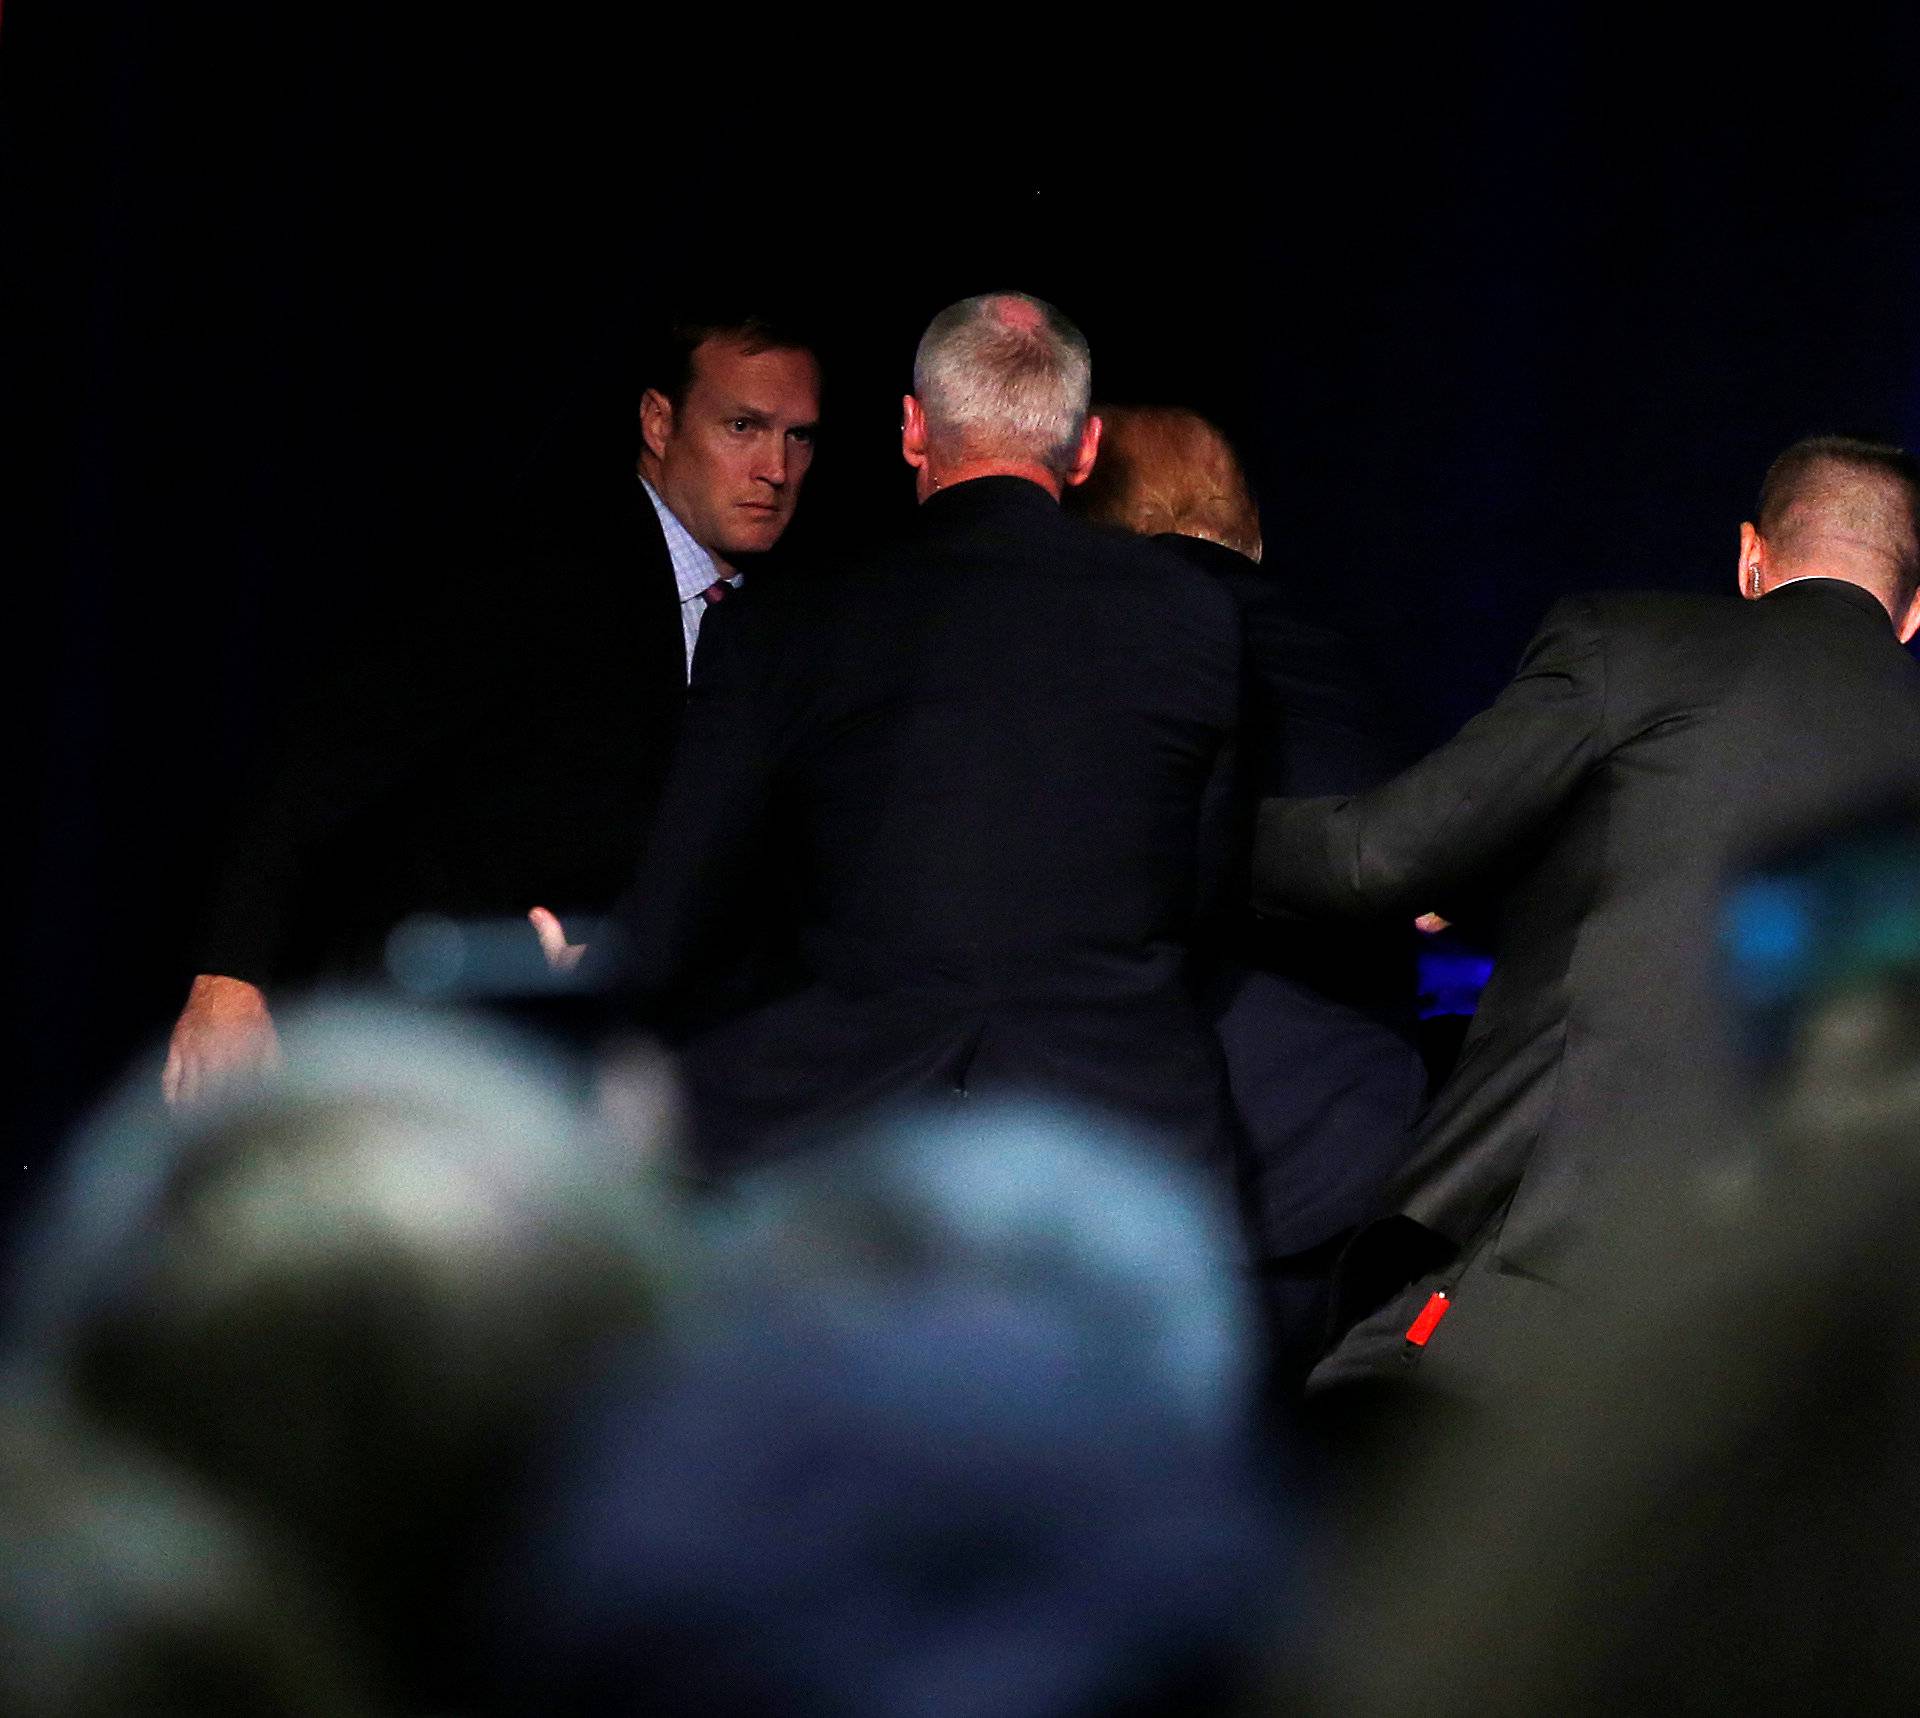 Republican presidential nominee Donald Trump is hustled off the stage by security agents following a perceived threat in the crowd at a campaign rally in Reno, Nevada